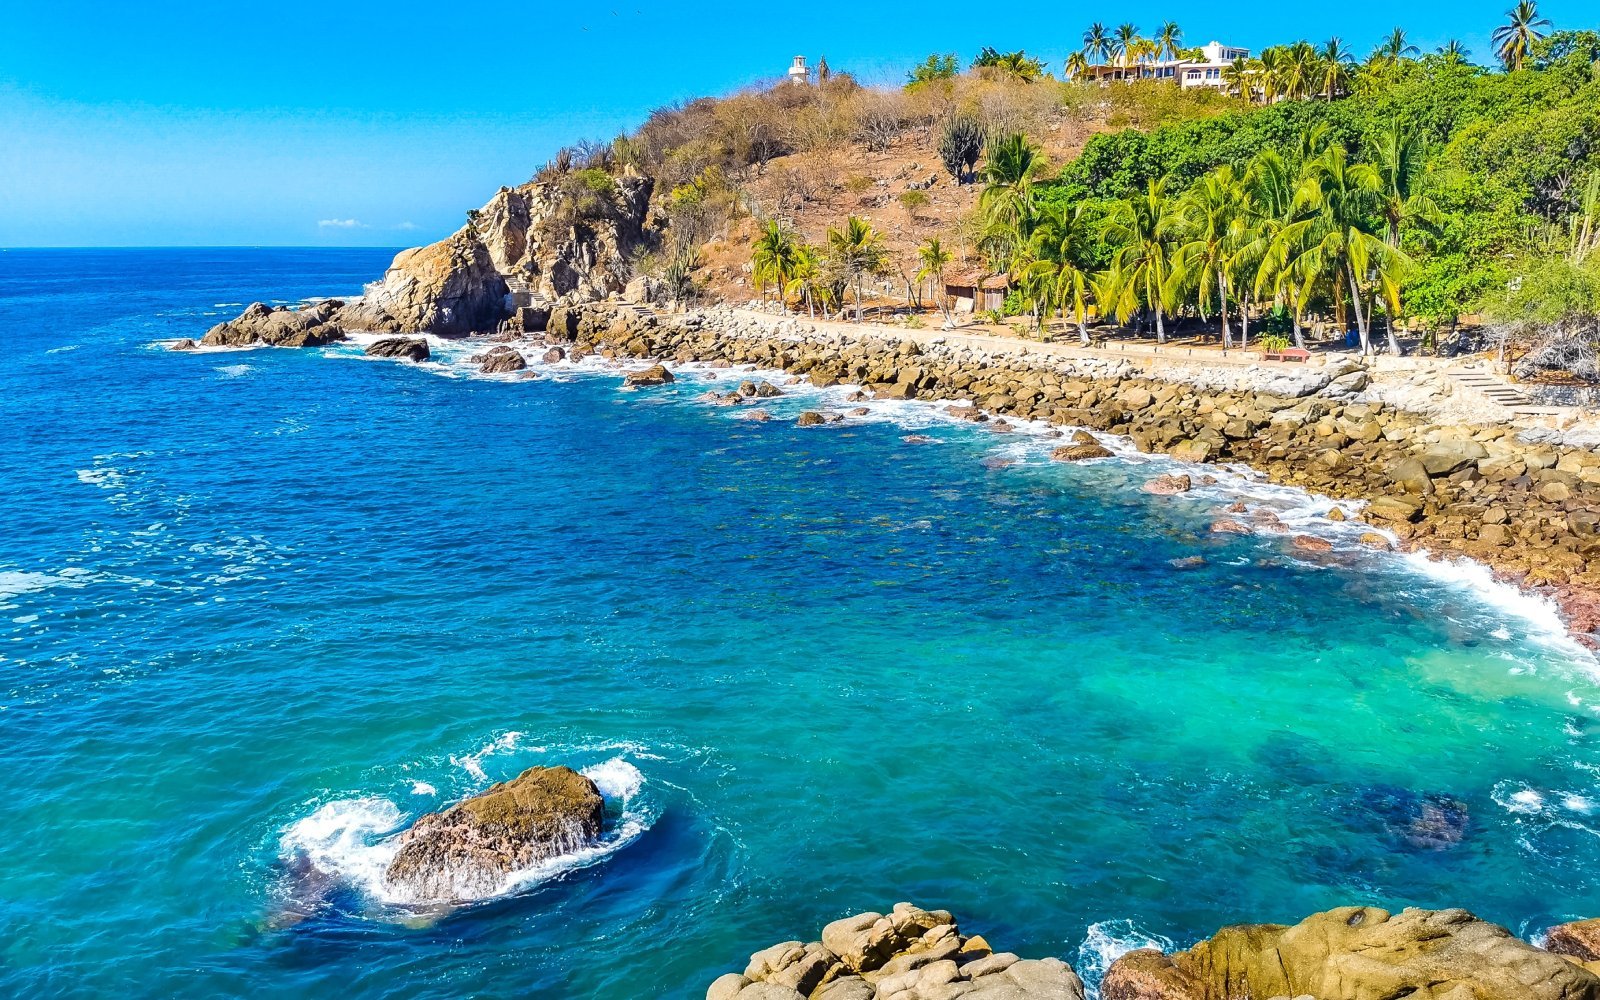 <p class="wp-caption-text">Image Credit: Shutterstock / Arkadij Schell</p>  <p>Escape to the land of tacos and tequila and discover the hidden gem of Puerto Escondido. With its heavy beach breaks and pumping swells, this epic spot is not for the faint of heart. Whether you’re charging the shore break or getting pitted in the barrel, Puerto Escondido offers up endless waves and endless stoke.</p>